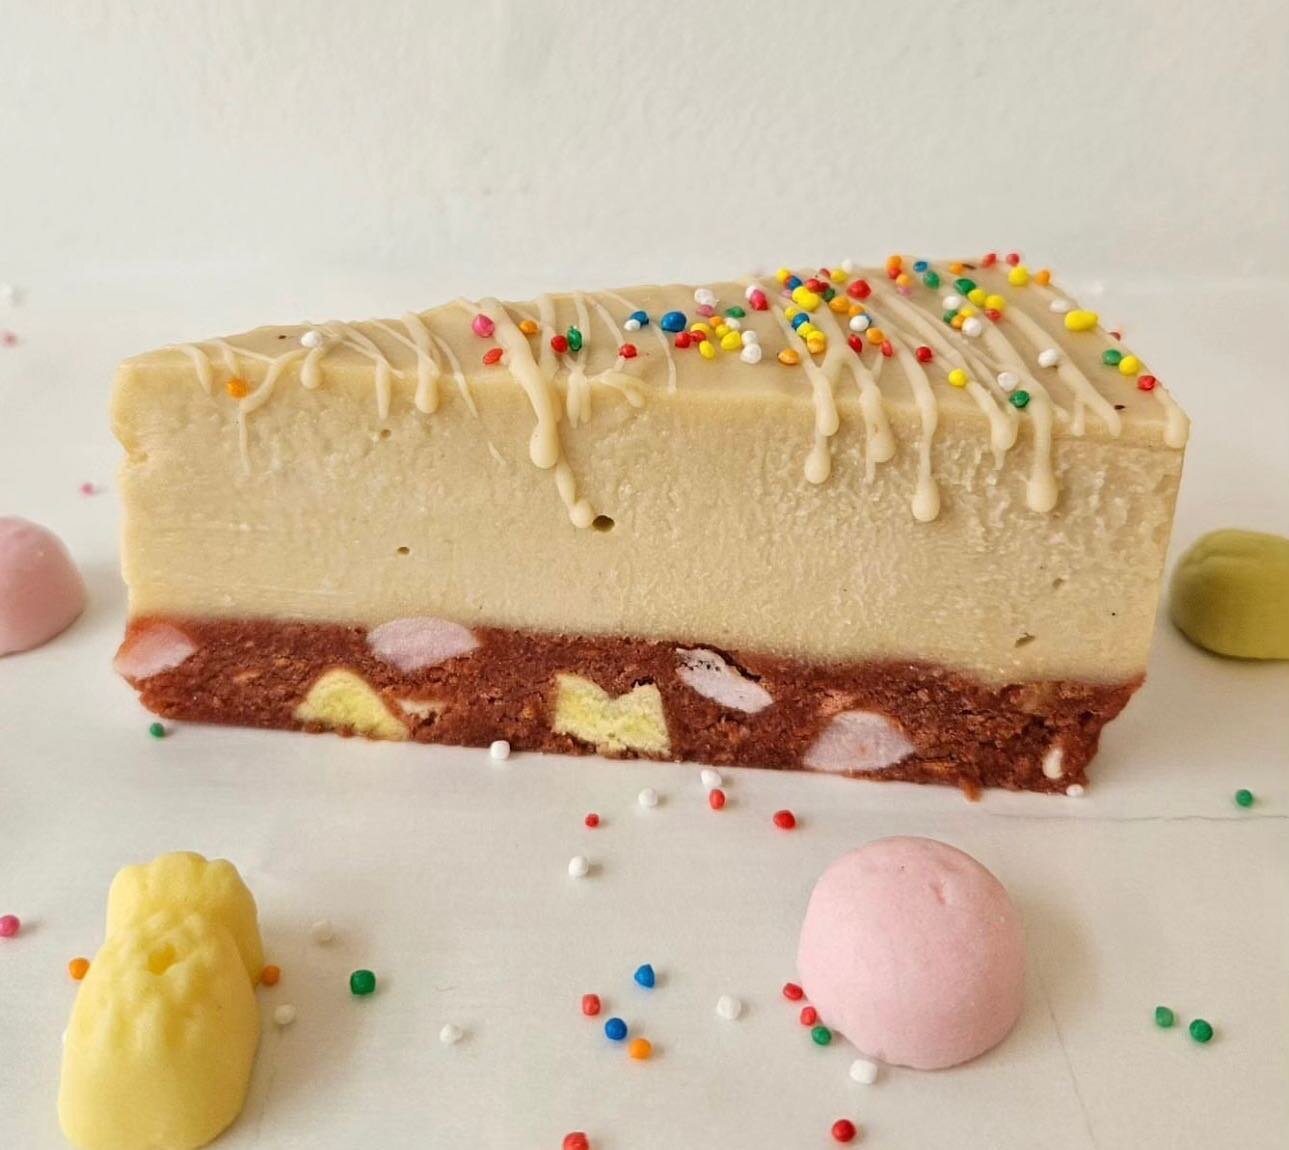 @hellorosiecaravan bring back that childhood nostalgia featuring Nudairy&rsquo;s Cream Cheese 😍 The most delicious vegan lolly cake I&rsquo;ve ever laid eyes on ! Check them out and all their tasty treats ❤️ 🌱 

#vegan #dairyfree #vegancheese #plan